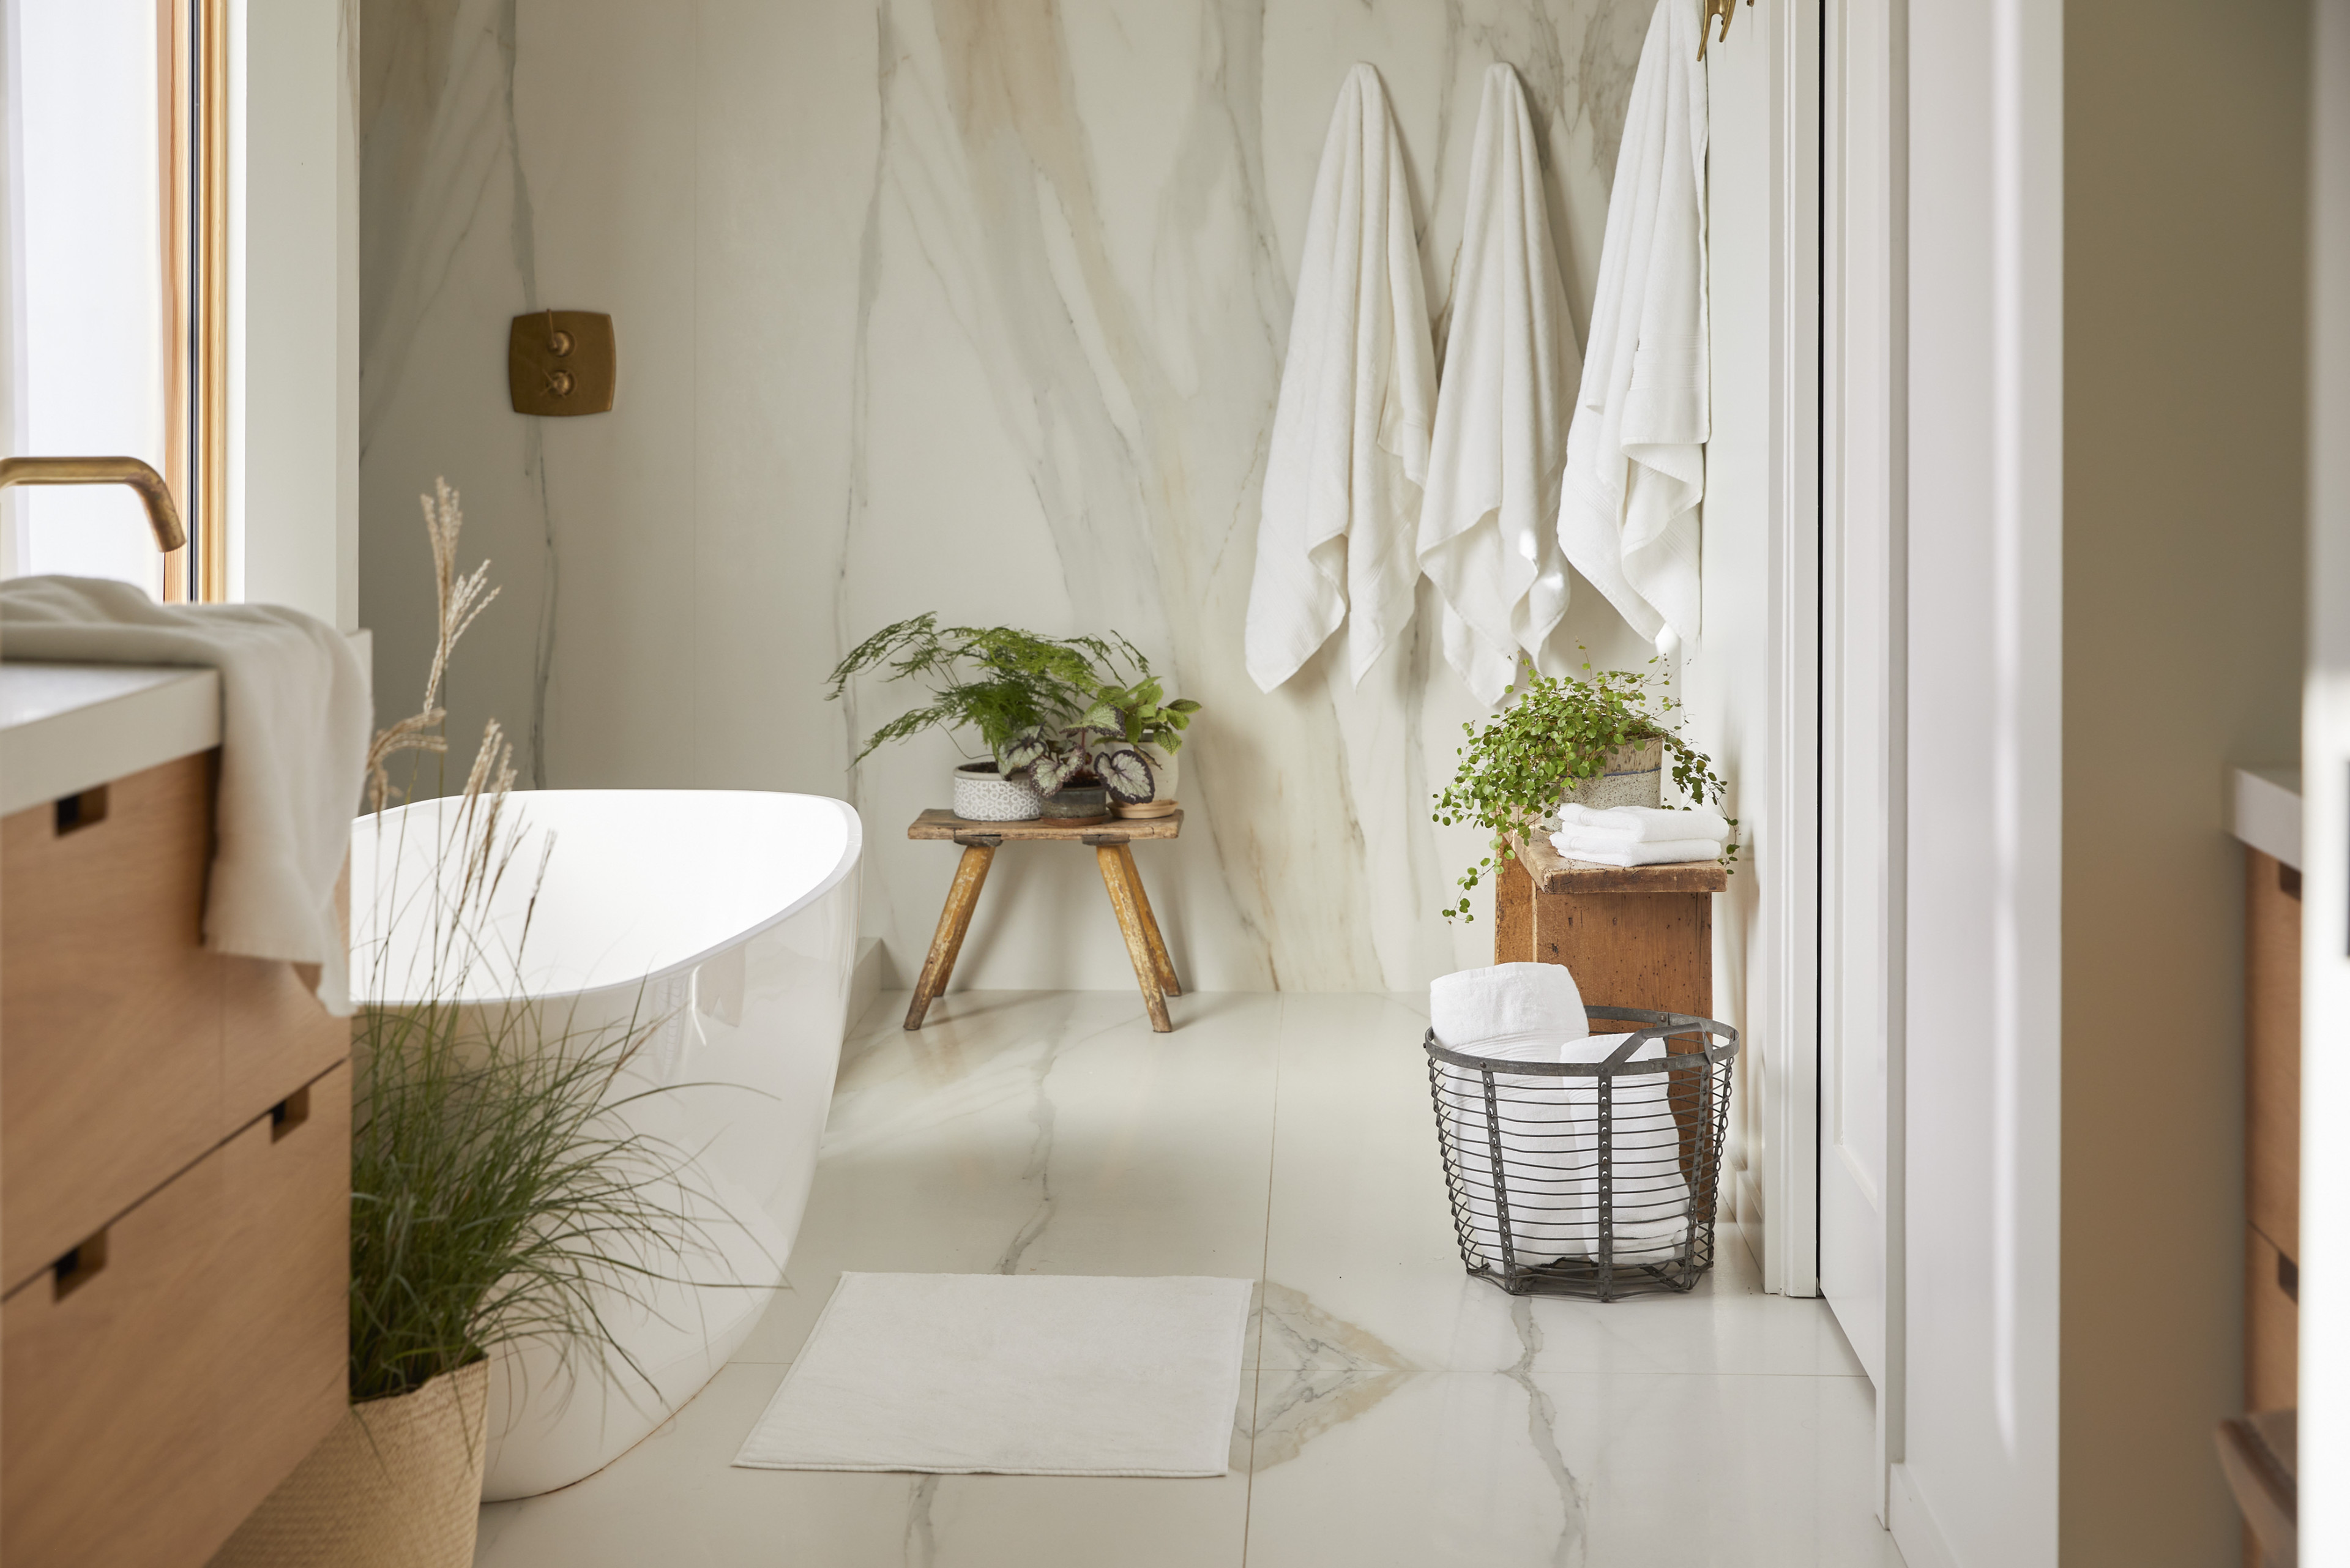 A naturally lit marble bathroom with three white colored robes, several white towels, and one white bathmat.